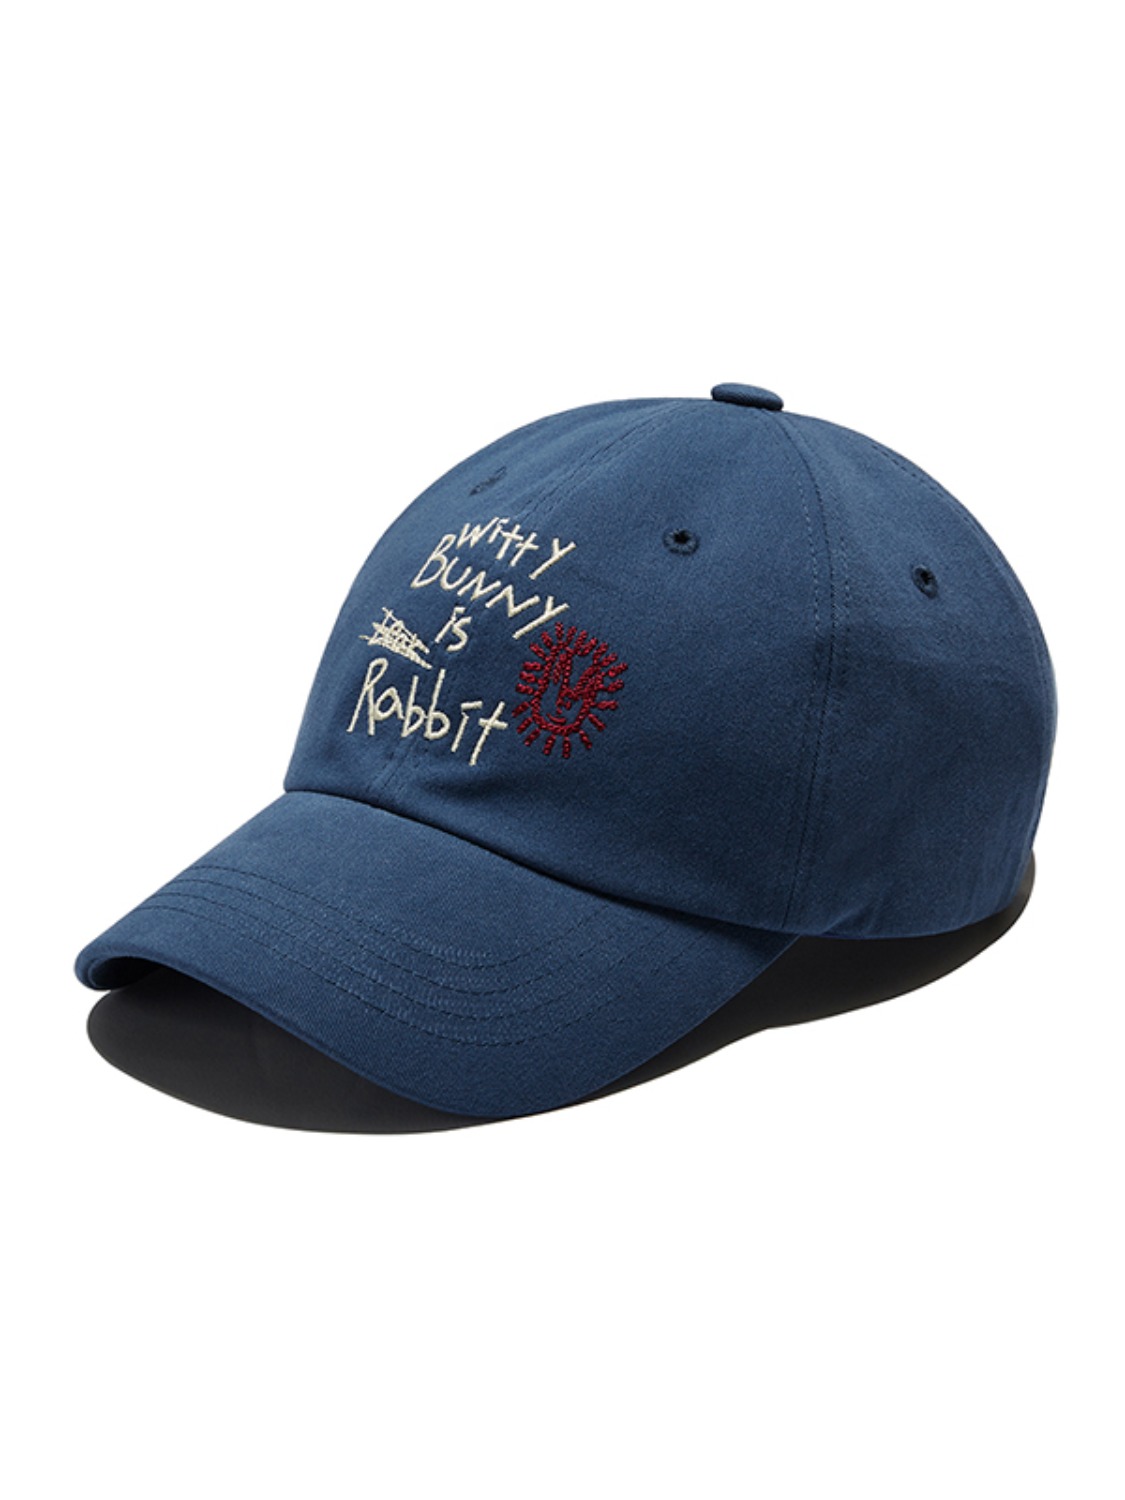 WITTY BUNNY LETTERING CAP [BLUE]